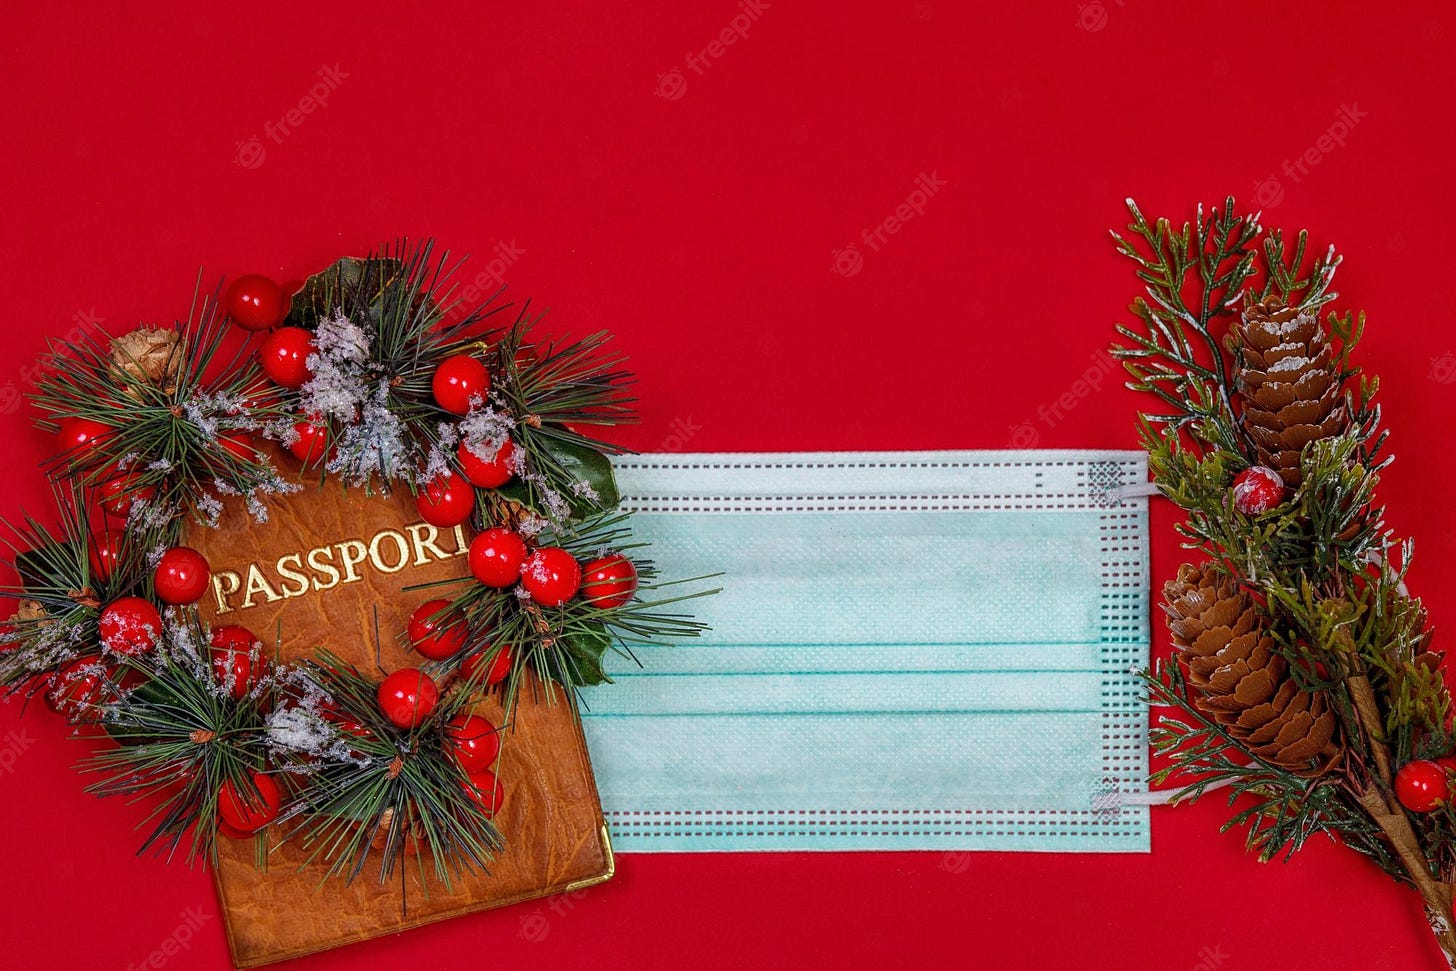 https://img.freepik.com/premium-photo/protective-surgical-mask-passport-with-christmas-decorations-red-background-christmas-holidays-travel-concept-coronavirus-covid-19-copy-space-space-text_98890-1179.jpg?w=2000